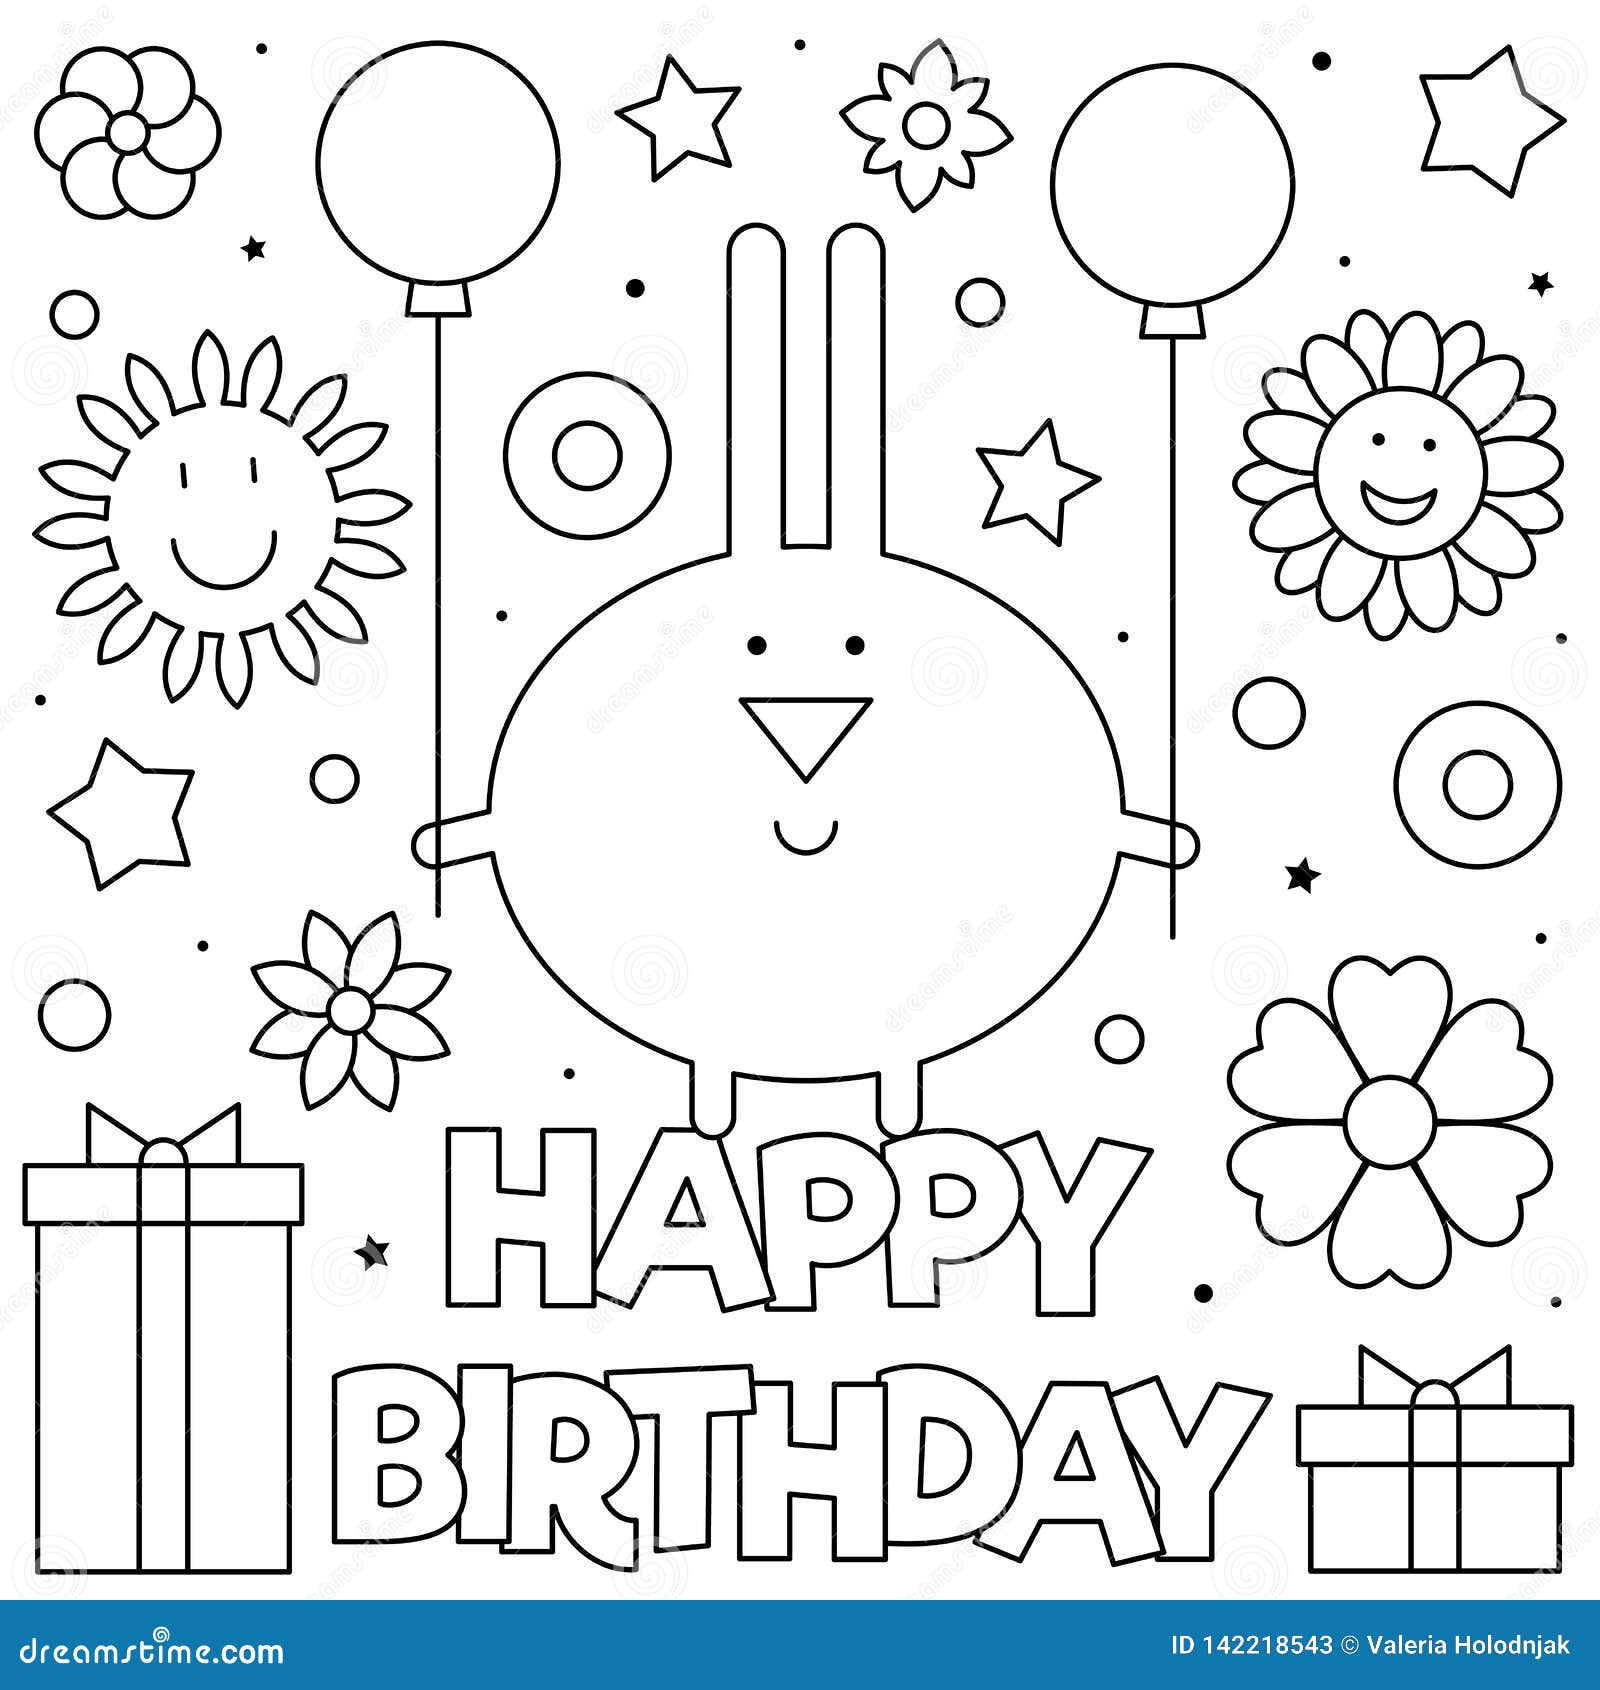 Happy Birthday. Coloring Page. Vector Illustration of Rabbit. Stock